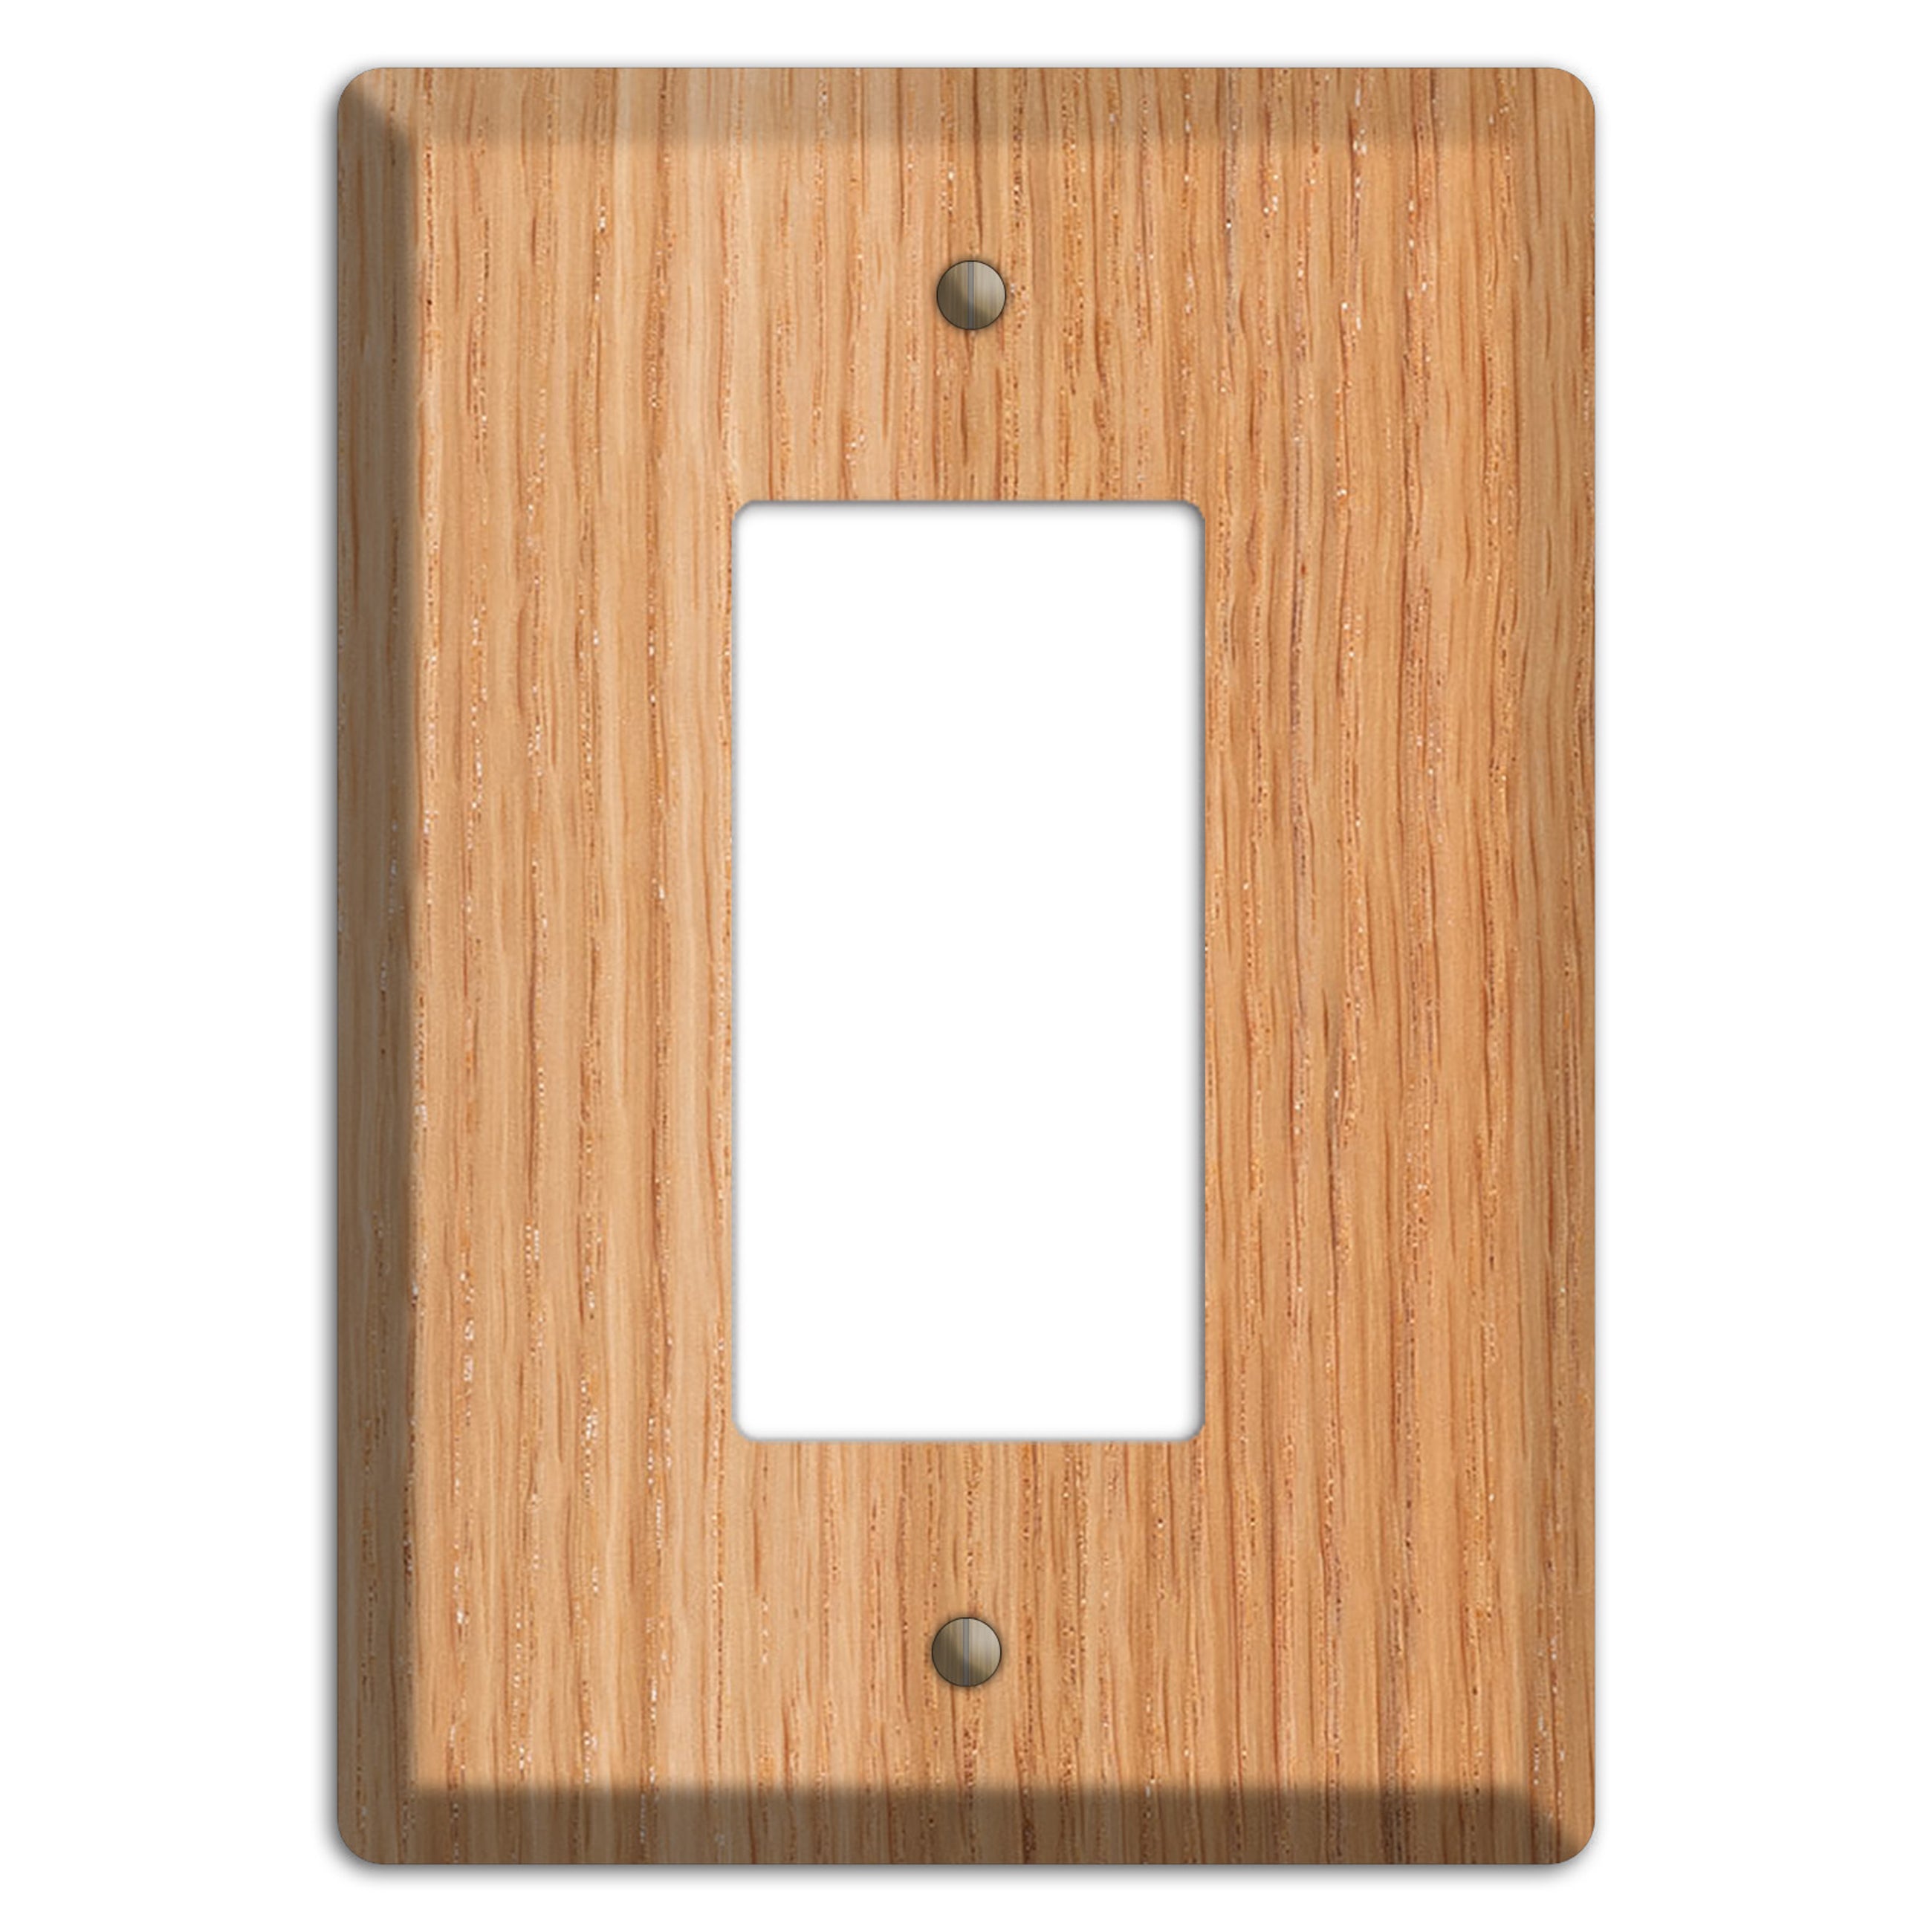 Oak Reclaimed Wood Wall Plate - 2 Gang Combo - Light Switch, Duplex Outlet  Cover